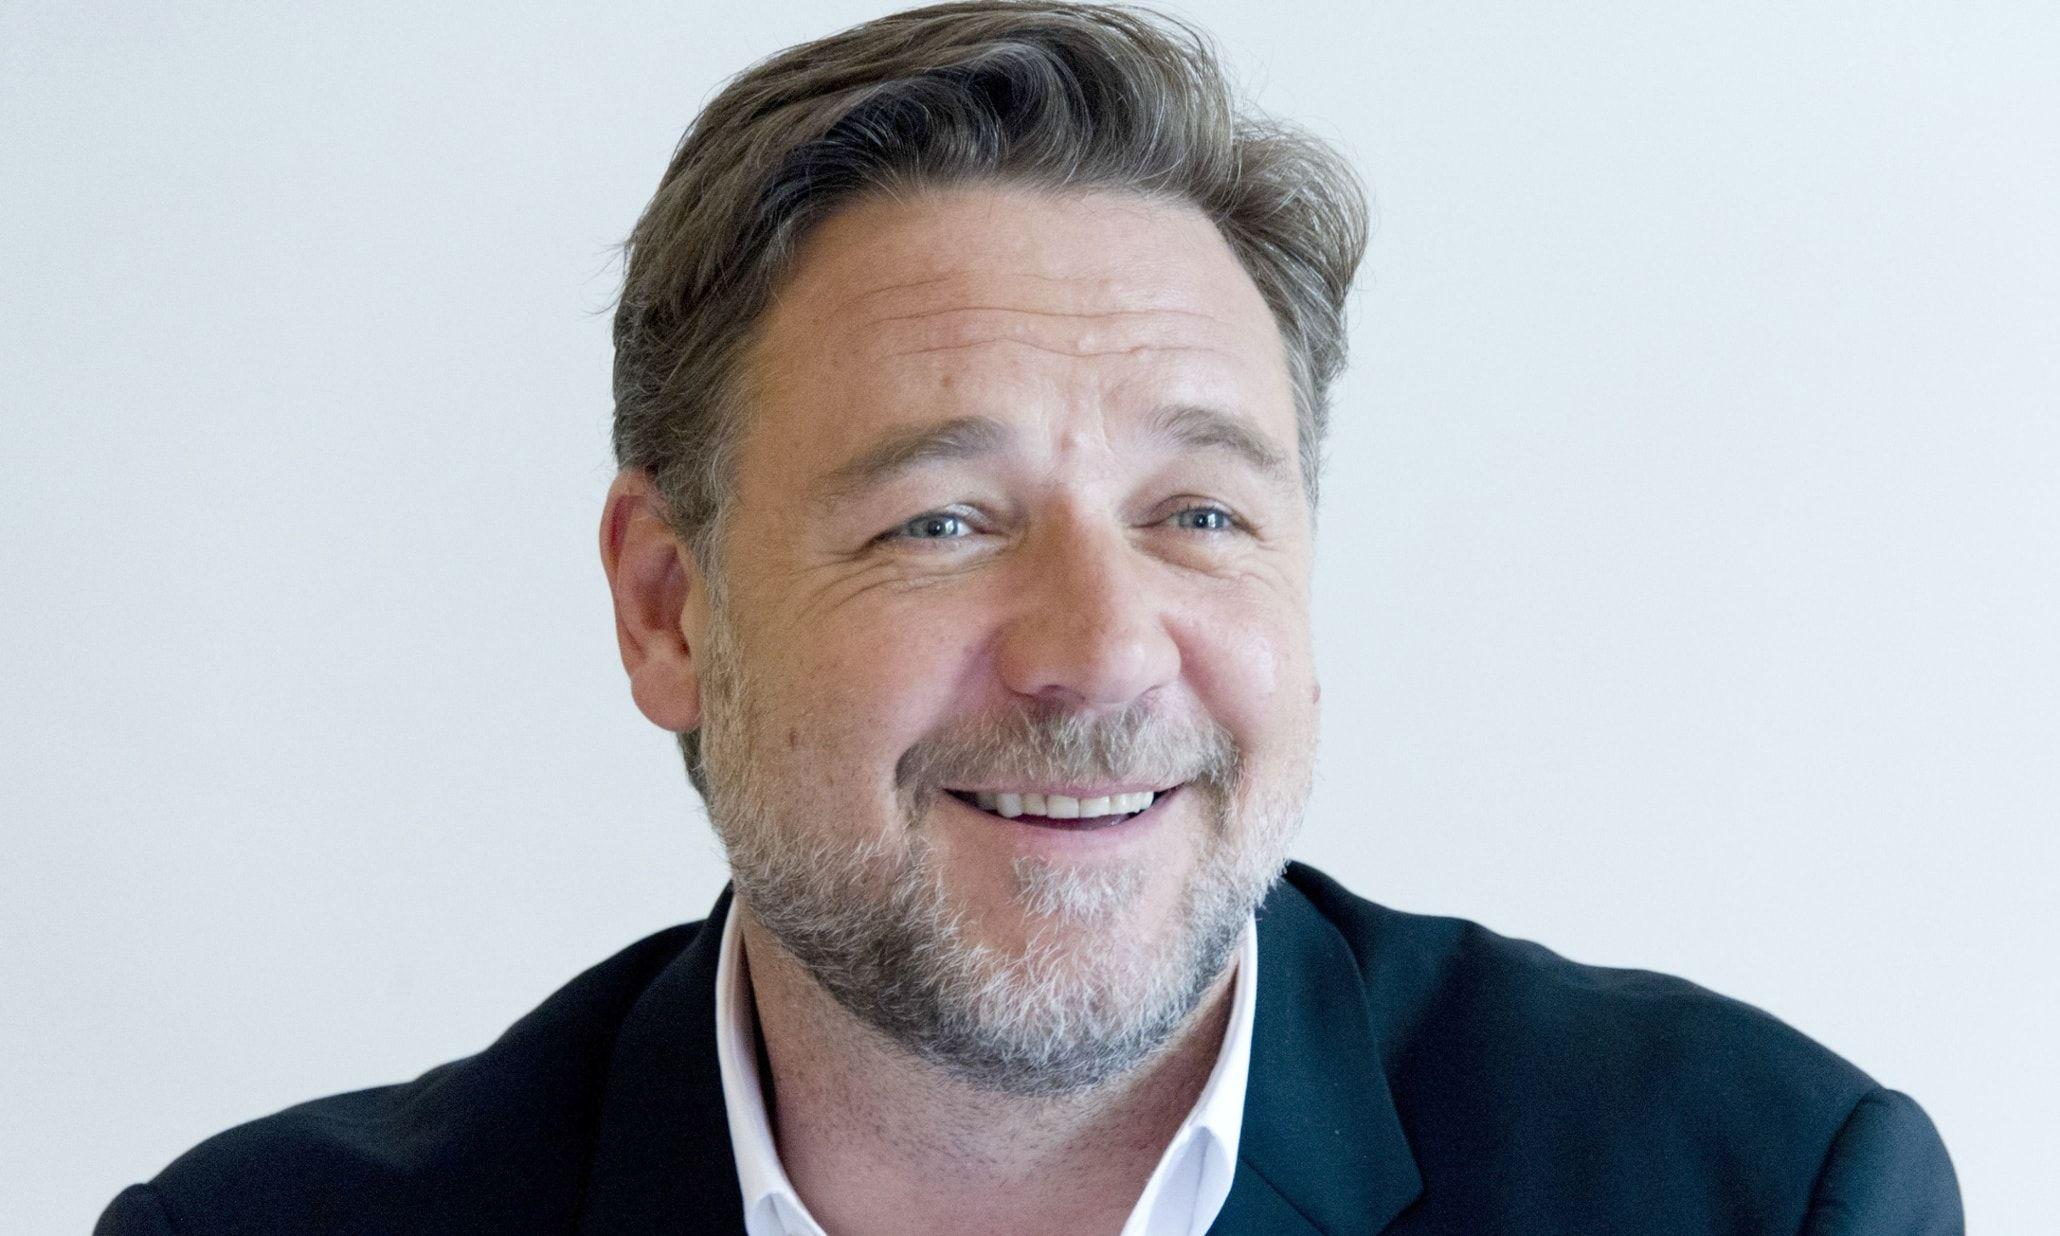 Russell Crowe Wallpapers - Wallpaper Cave